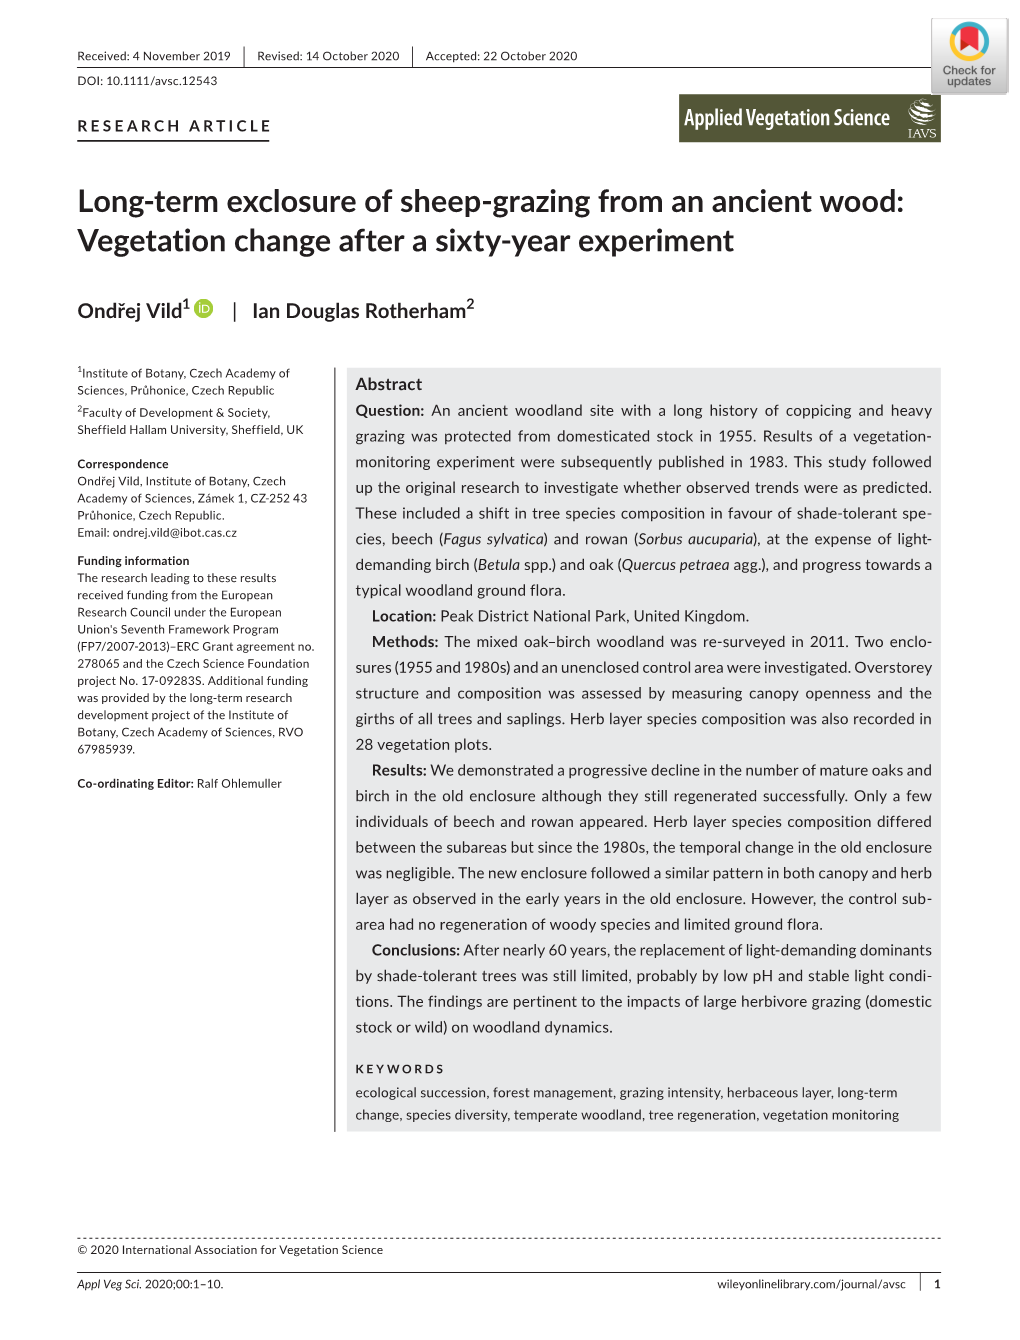 Long‐Term Exclosure of Sheep‐Grazing from an Ancient Wood